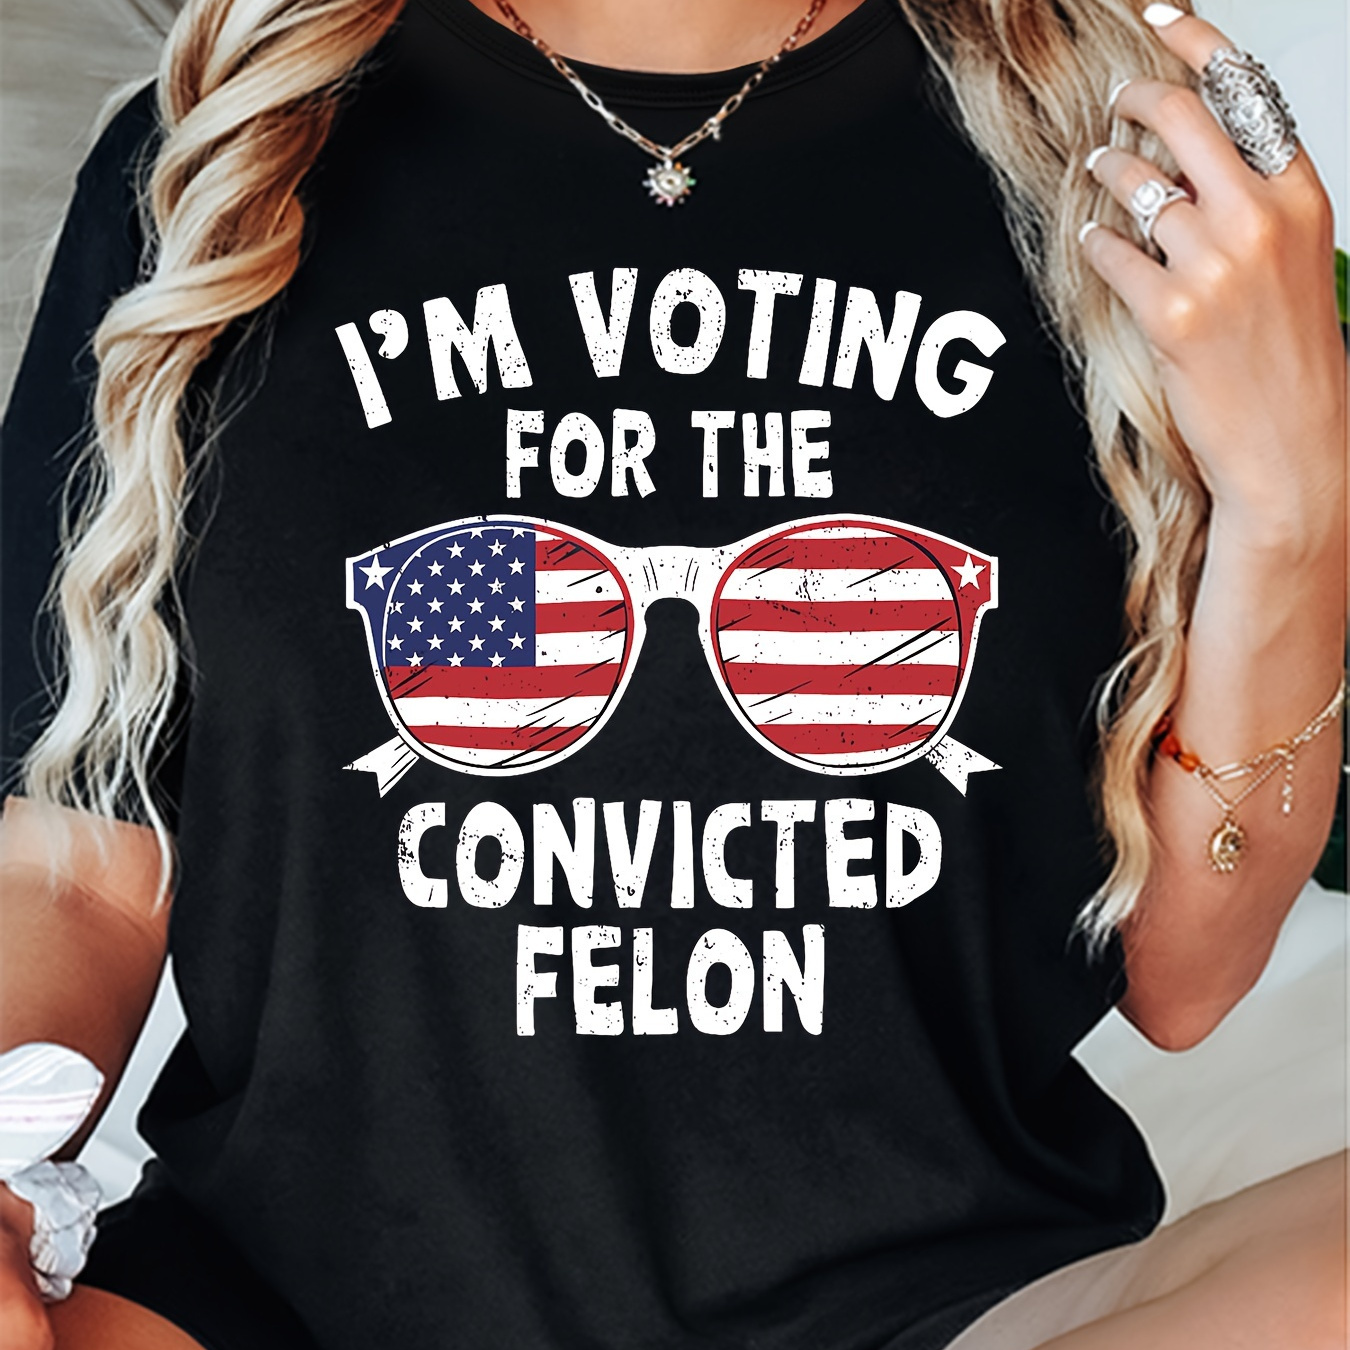 

Patriotic Sunglasses Graphic Tee, "i'm Voting For The" Print Round Neck T-shirt, Spring & Summer Short Sleeve Casual Sporty Daily Top For Women, Casual Style Independence Day